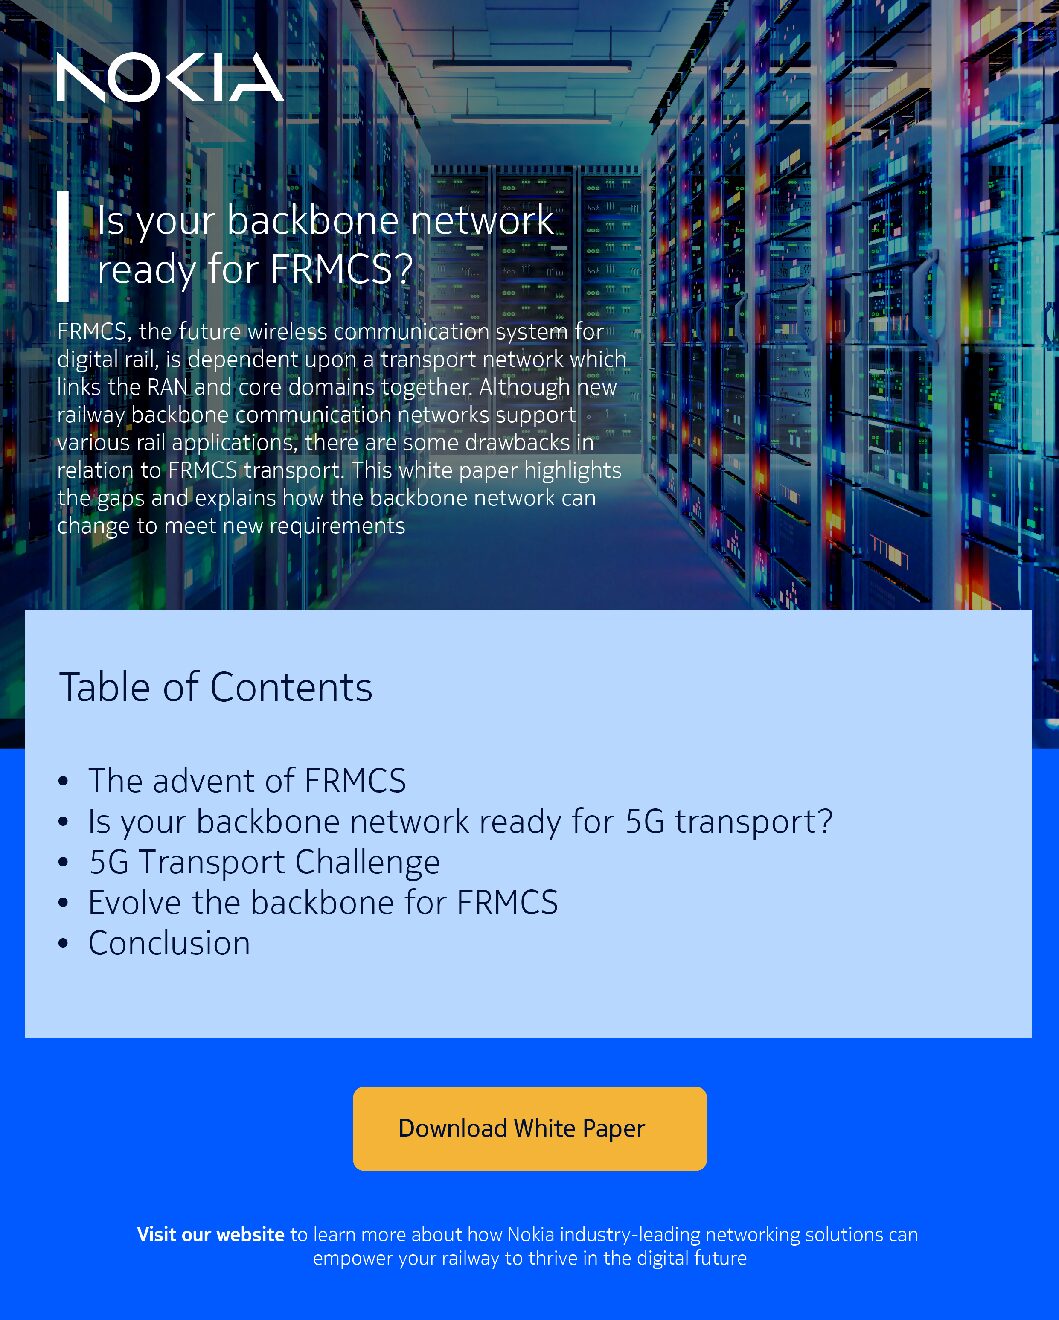 Nokia | Is Your Backbone Network Ready for FRMCS?